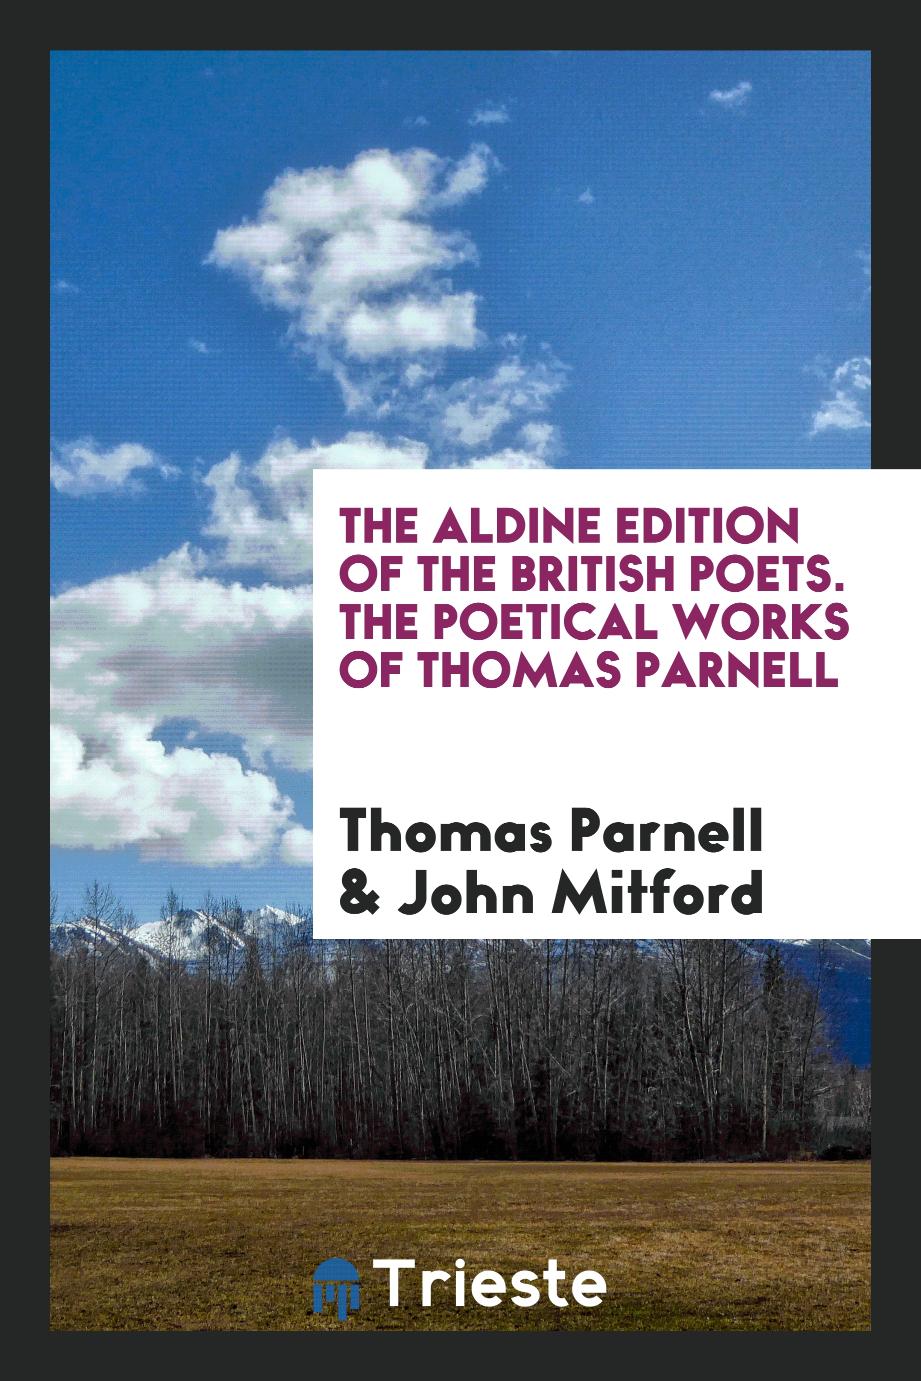 The Aldine Edition of the British Poets. The Poetical Works of Thomas Parnell